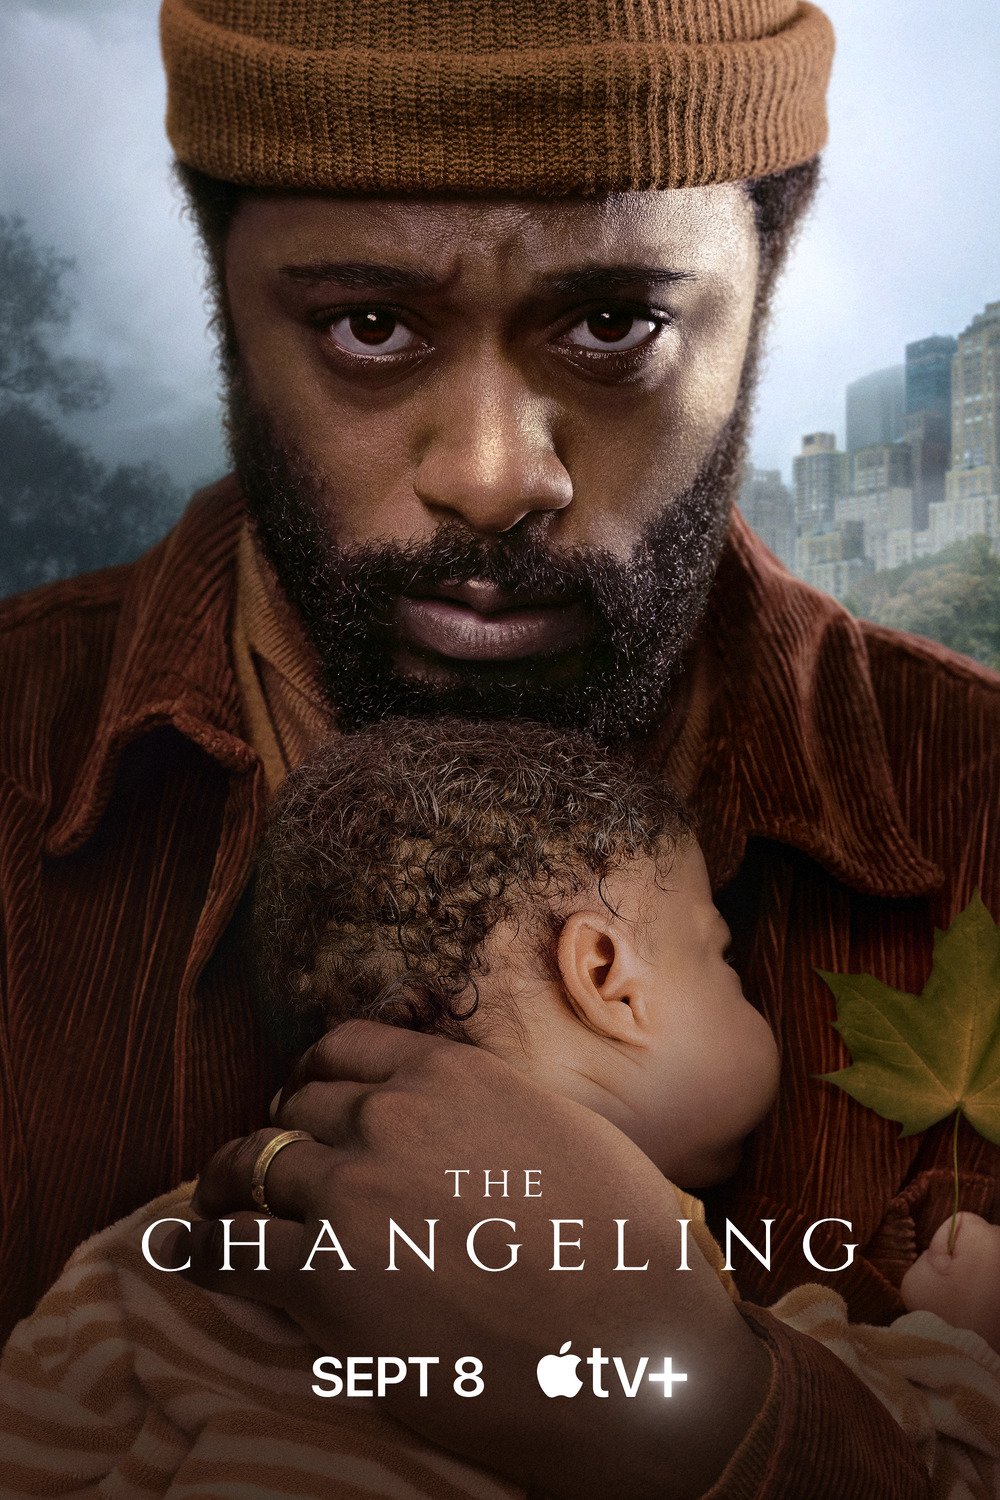 Poster of the movie The Changeling